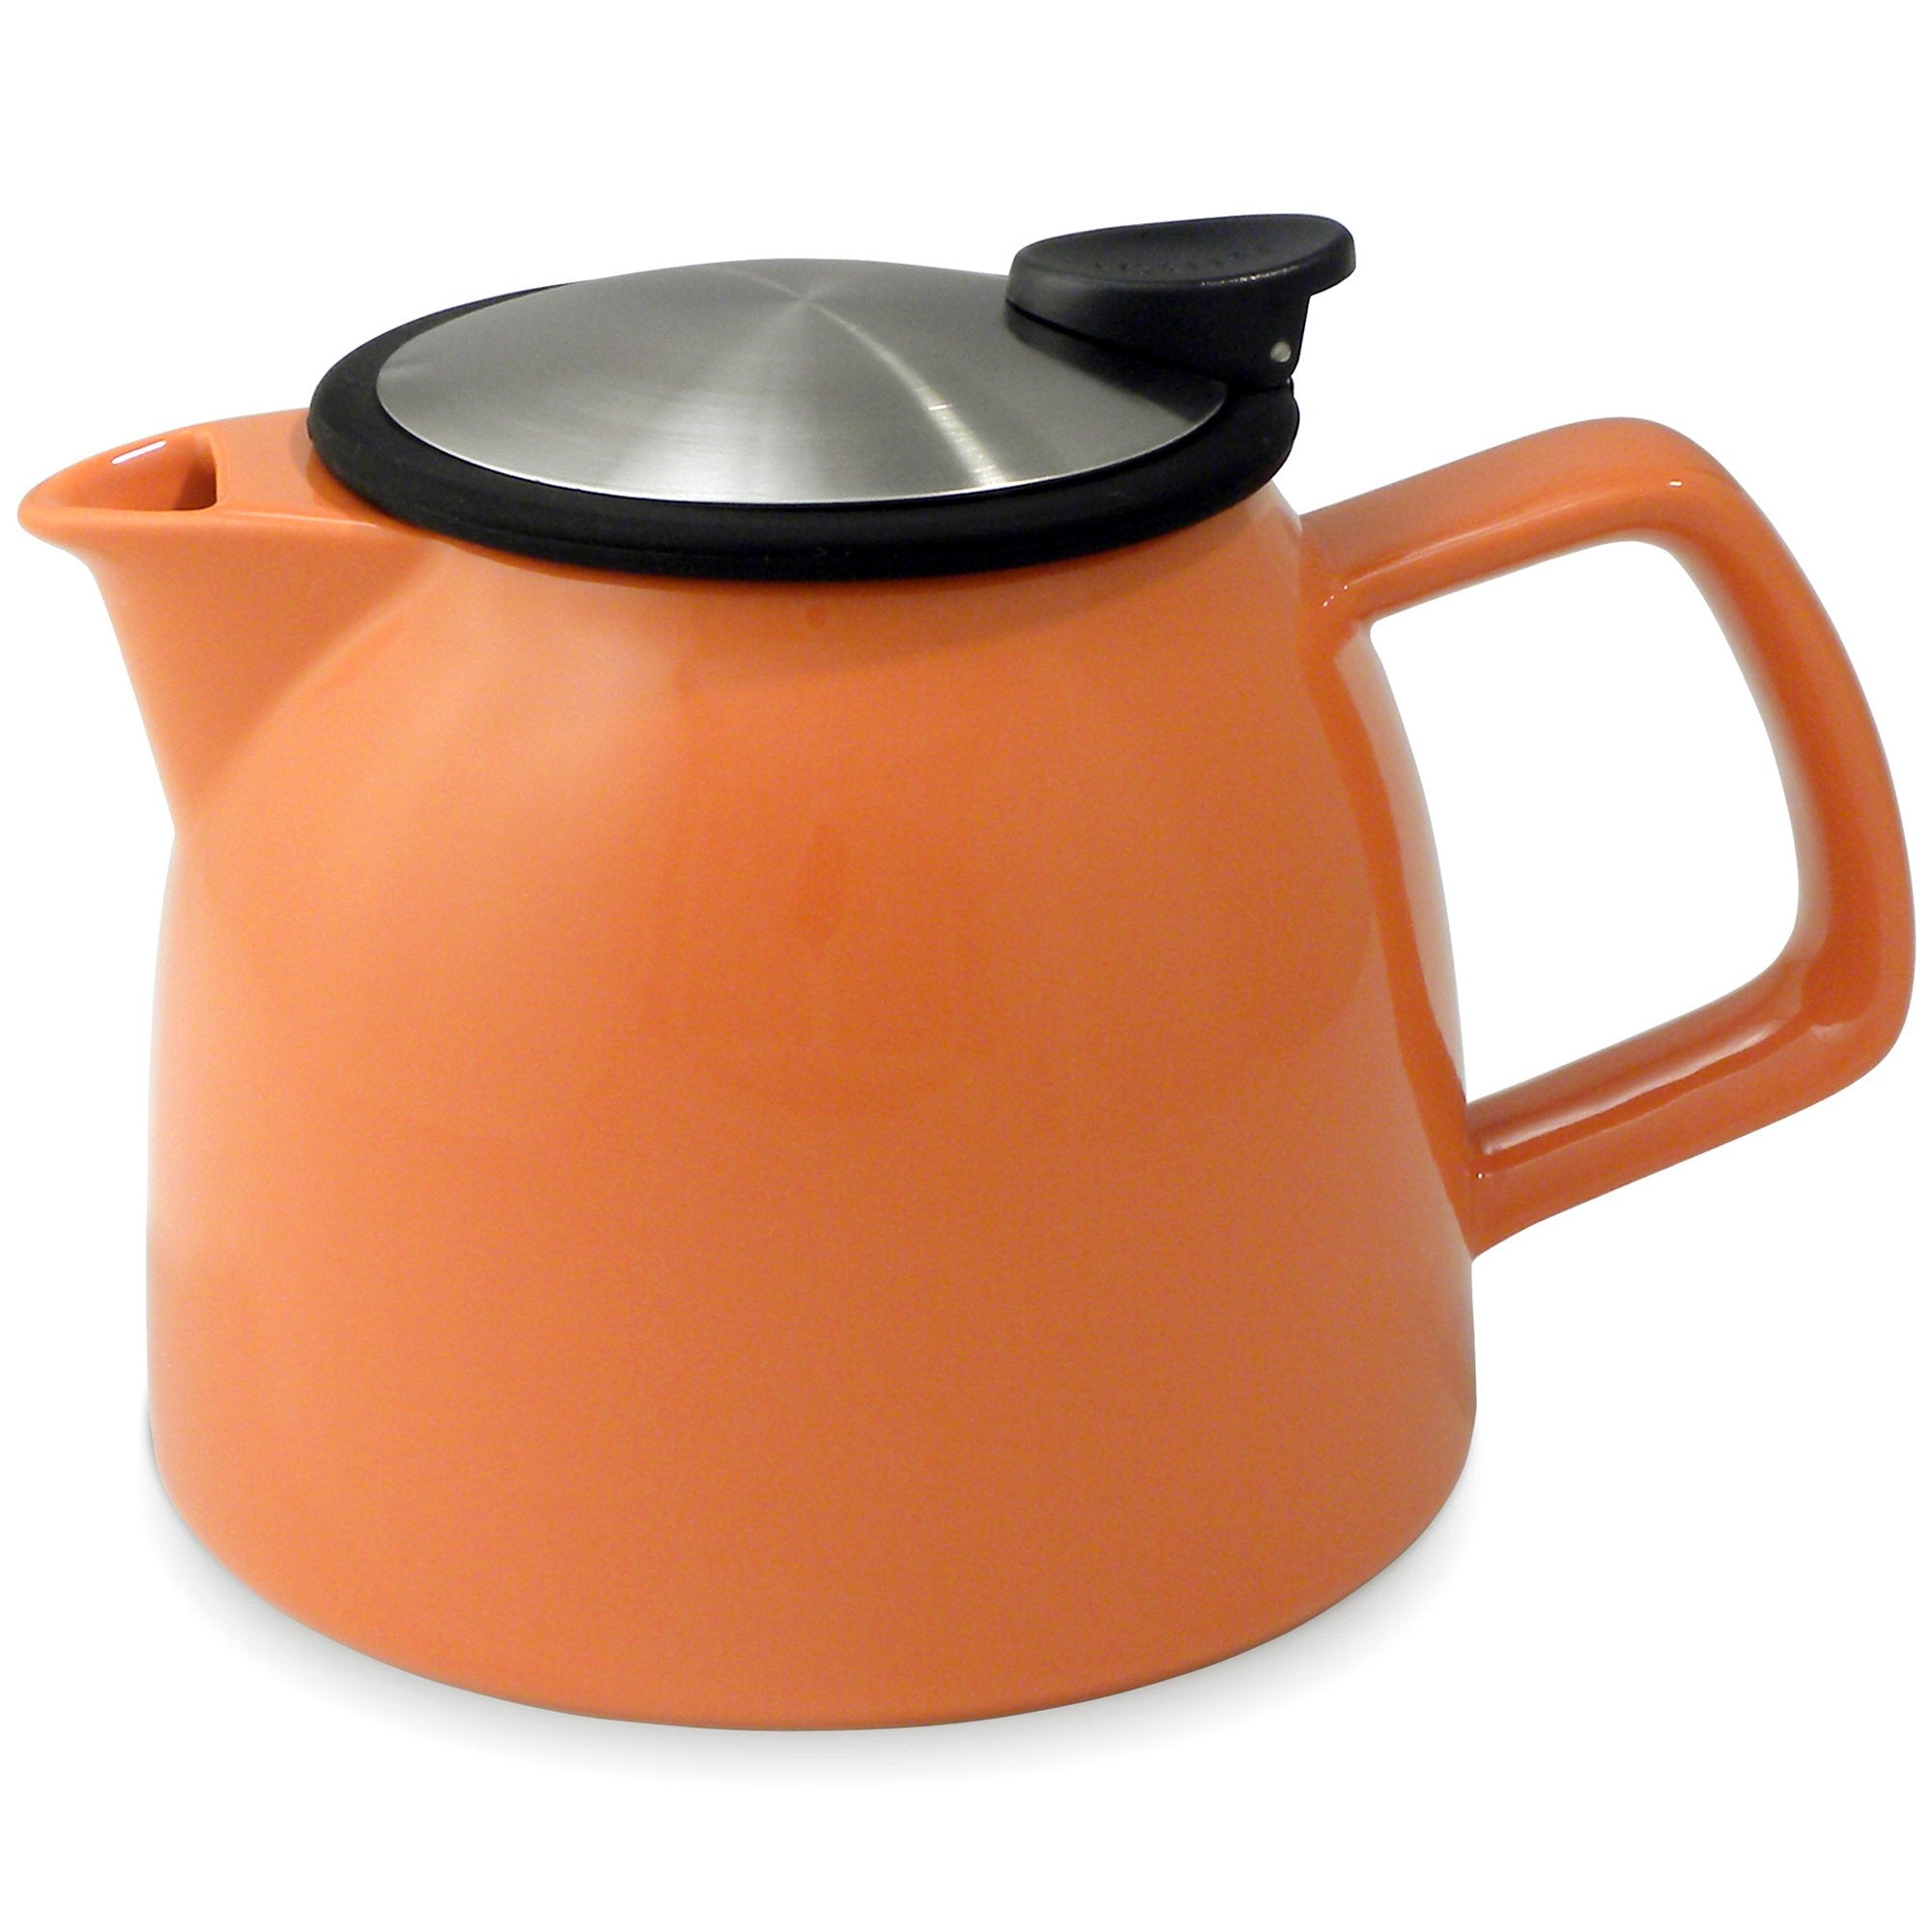 Tealula 26 oz bell-shaped carrot orange teapot with square handle and black and silver detachable push-on-lid